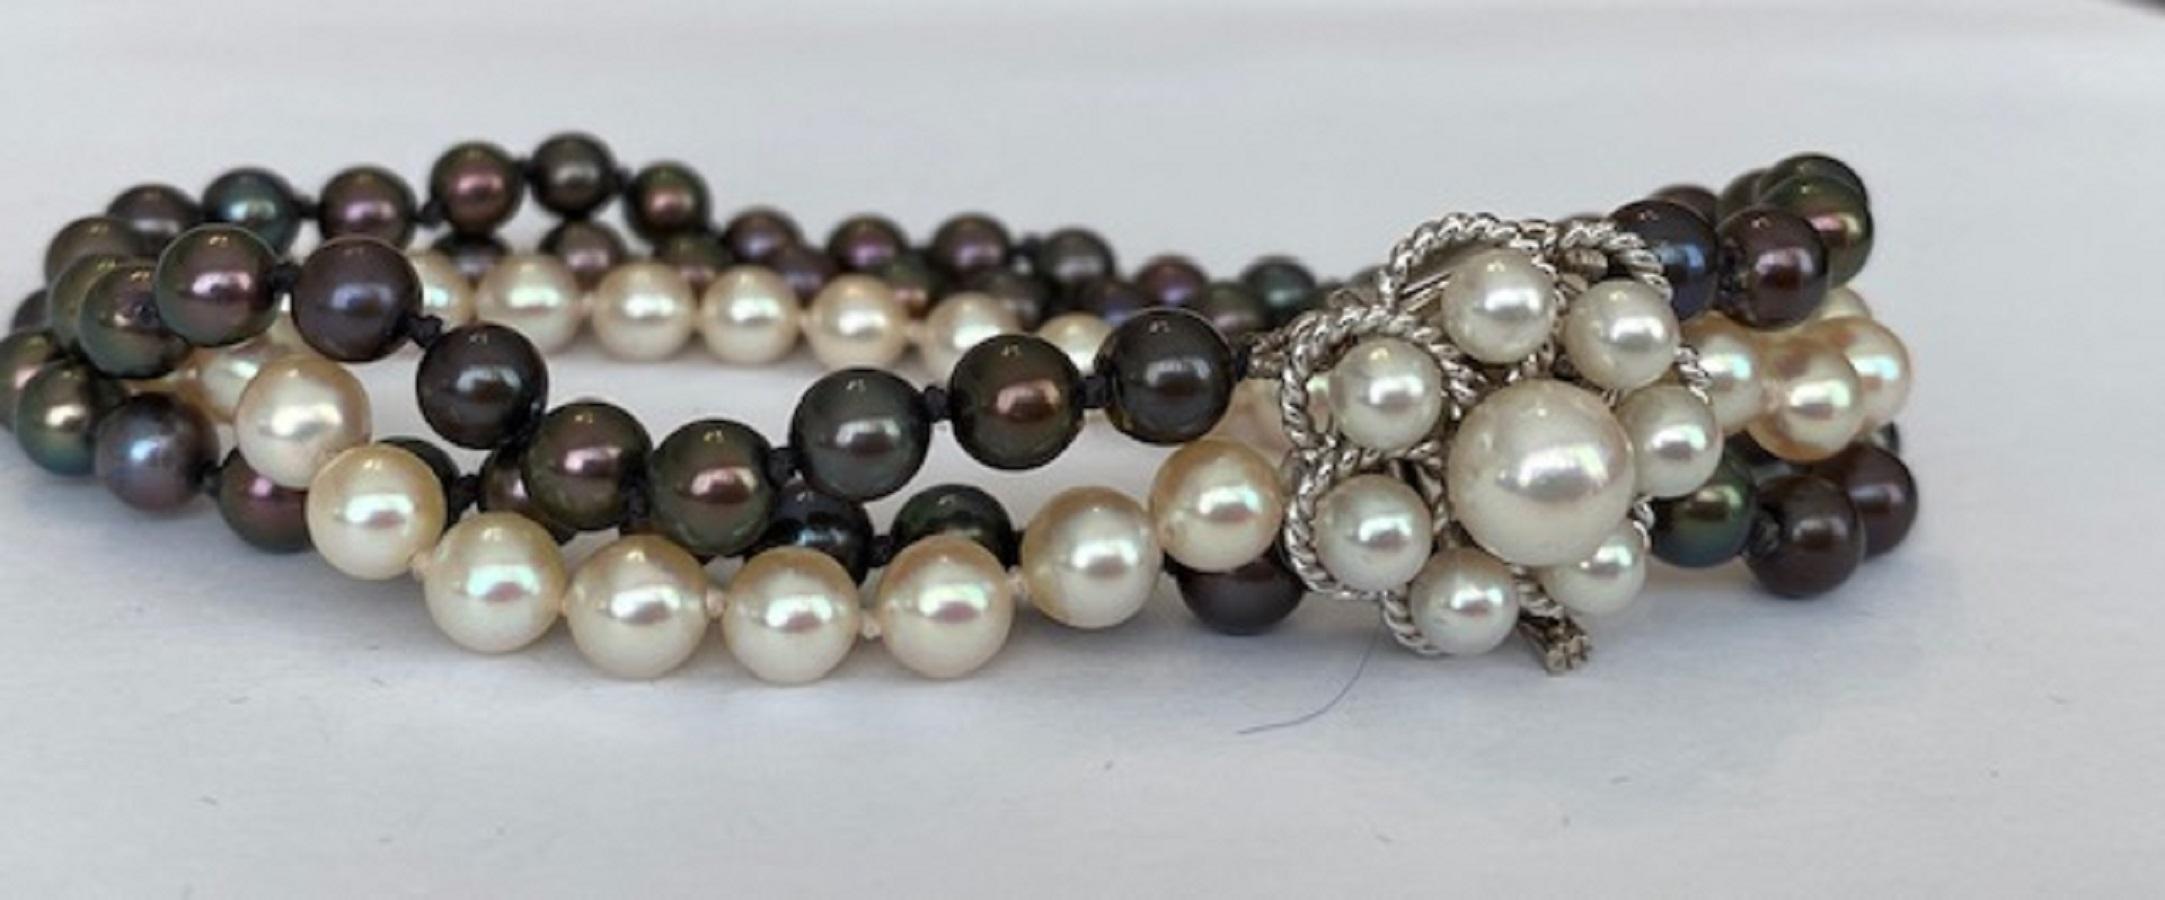 Women's Pearl Bracelet Circa 1970 s Cultured Pearls Gold Clasp For Sale